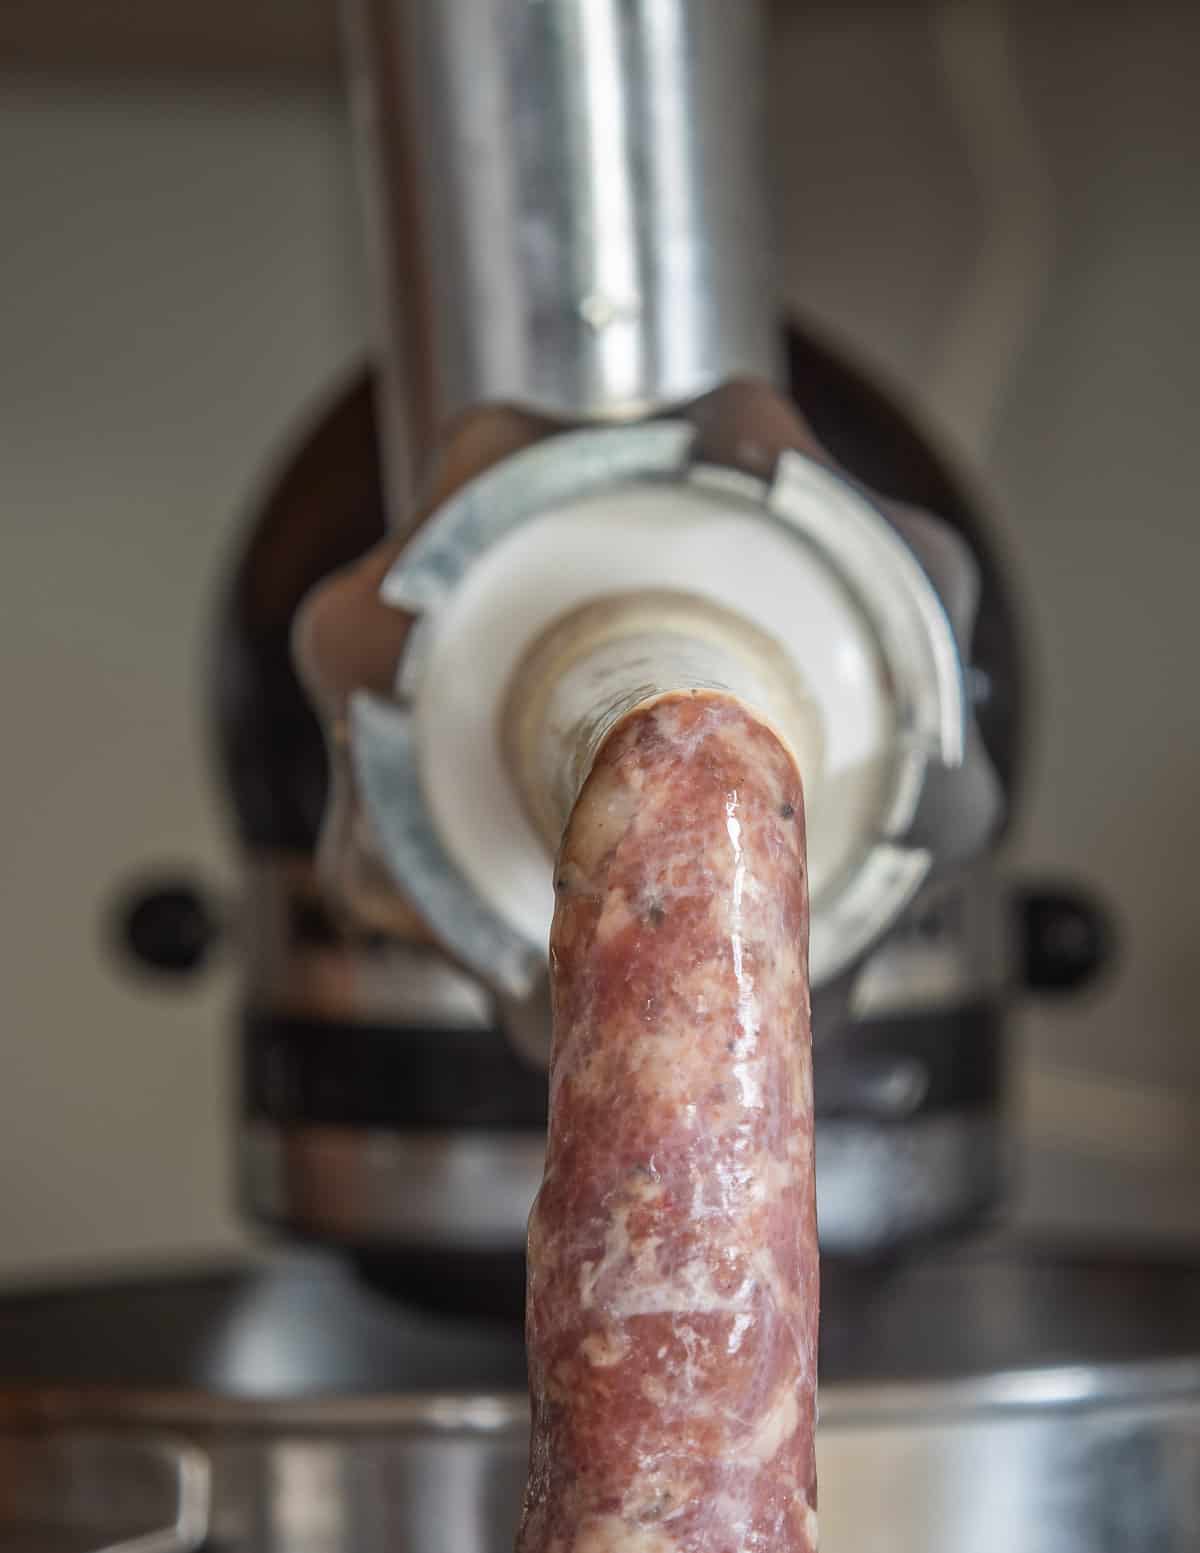 Packing wild boar sausage into casings using a sausage stuffer.